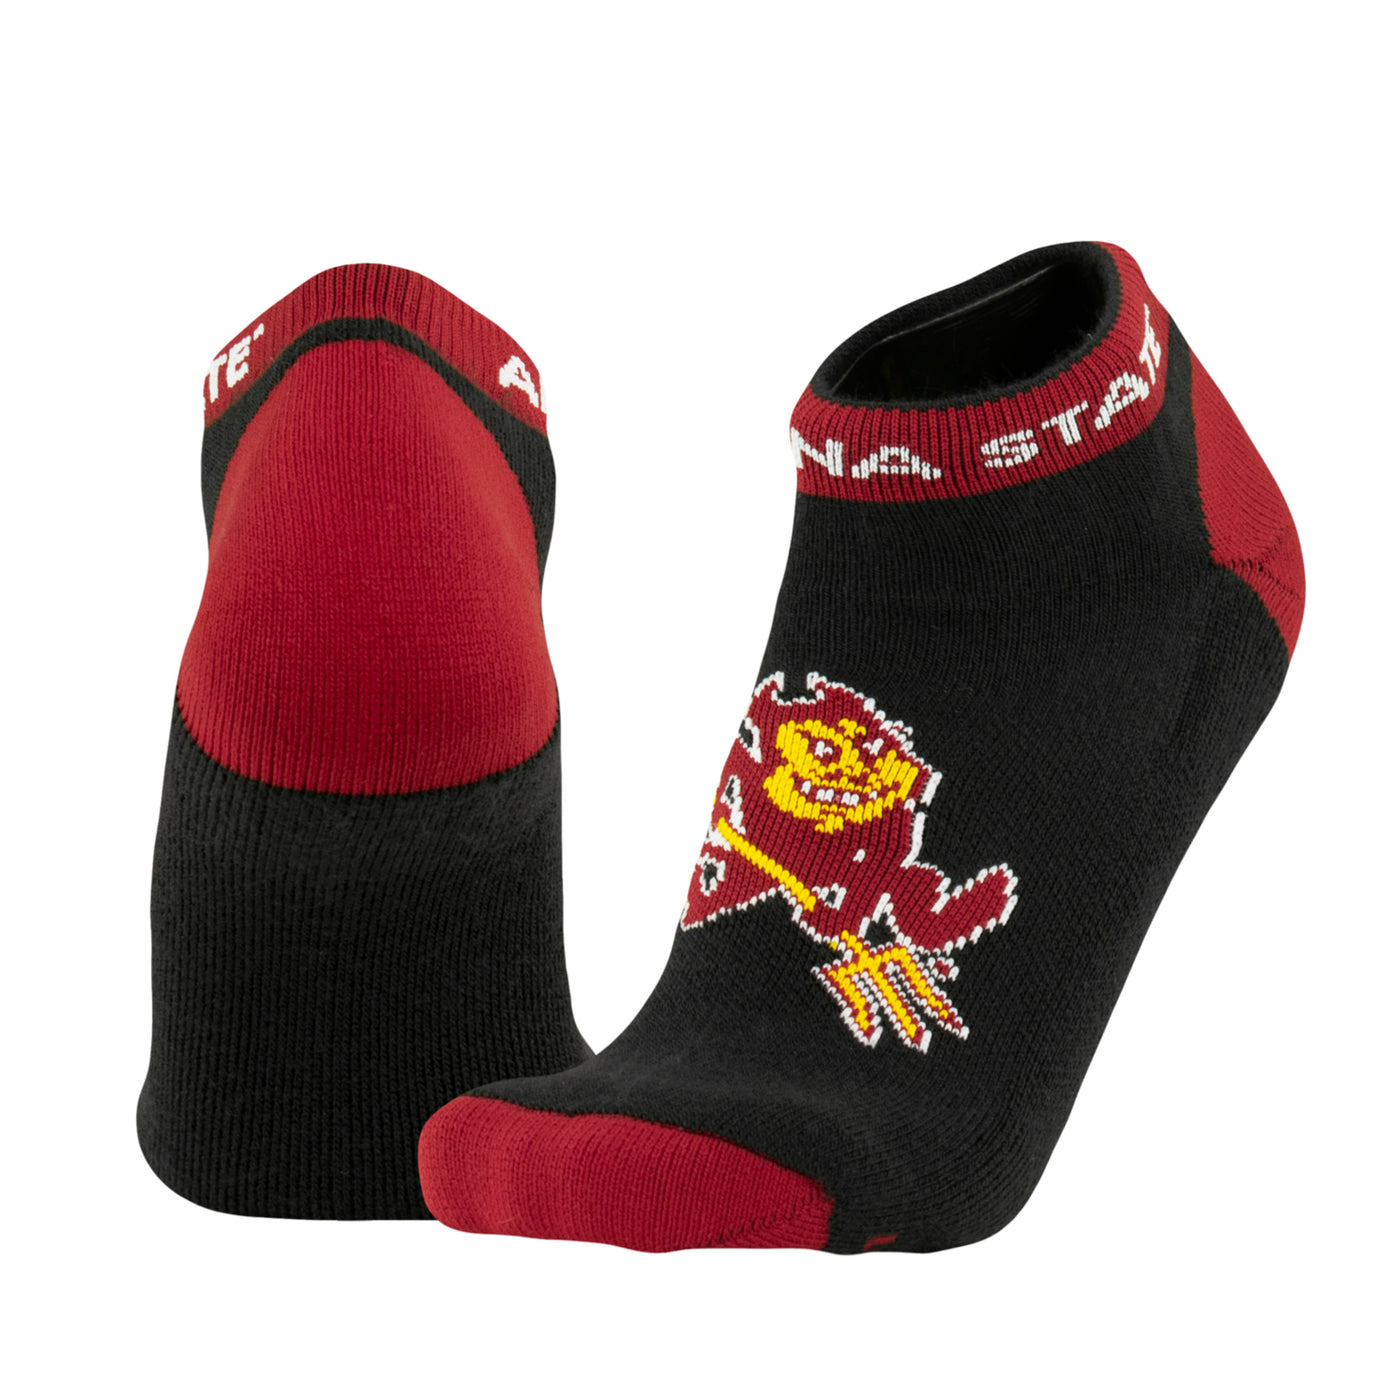 ASU black low cut socks with Sparky on the top and maroon detailing on the toe, heal, and ankle 